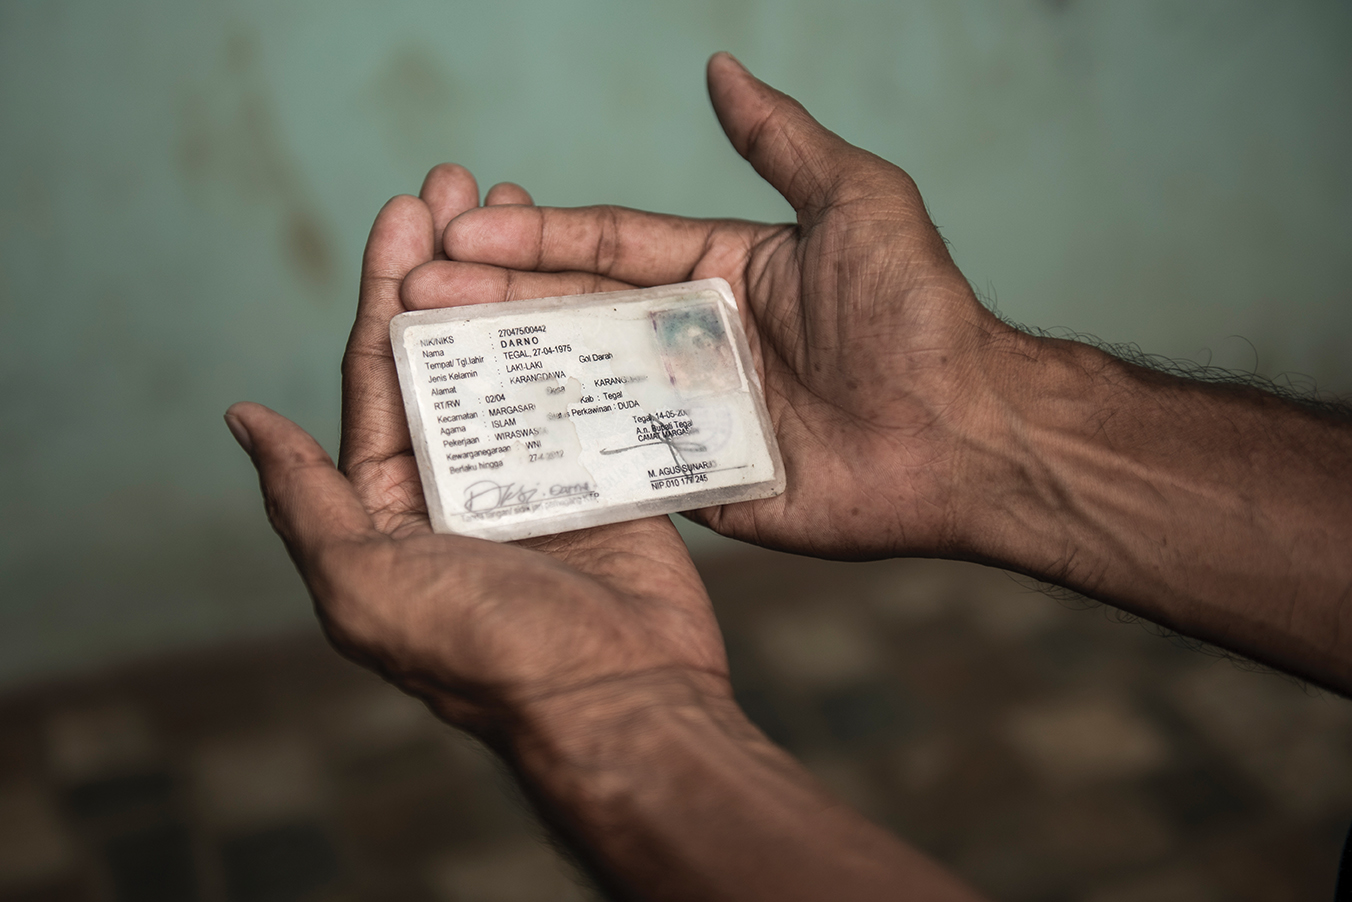 A trans woman holds ID card, which has her old name on it.